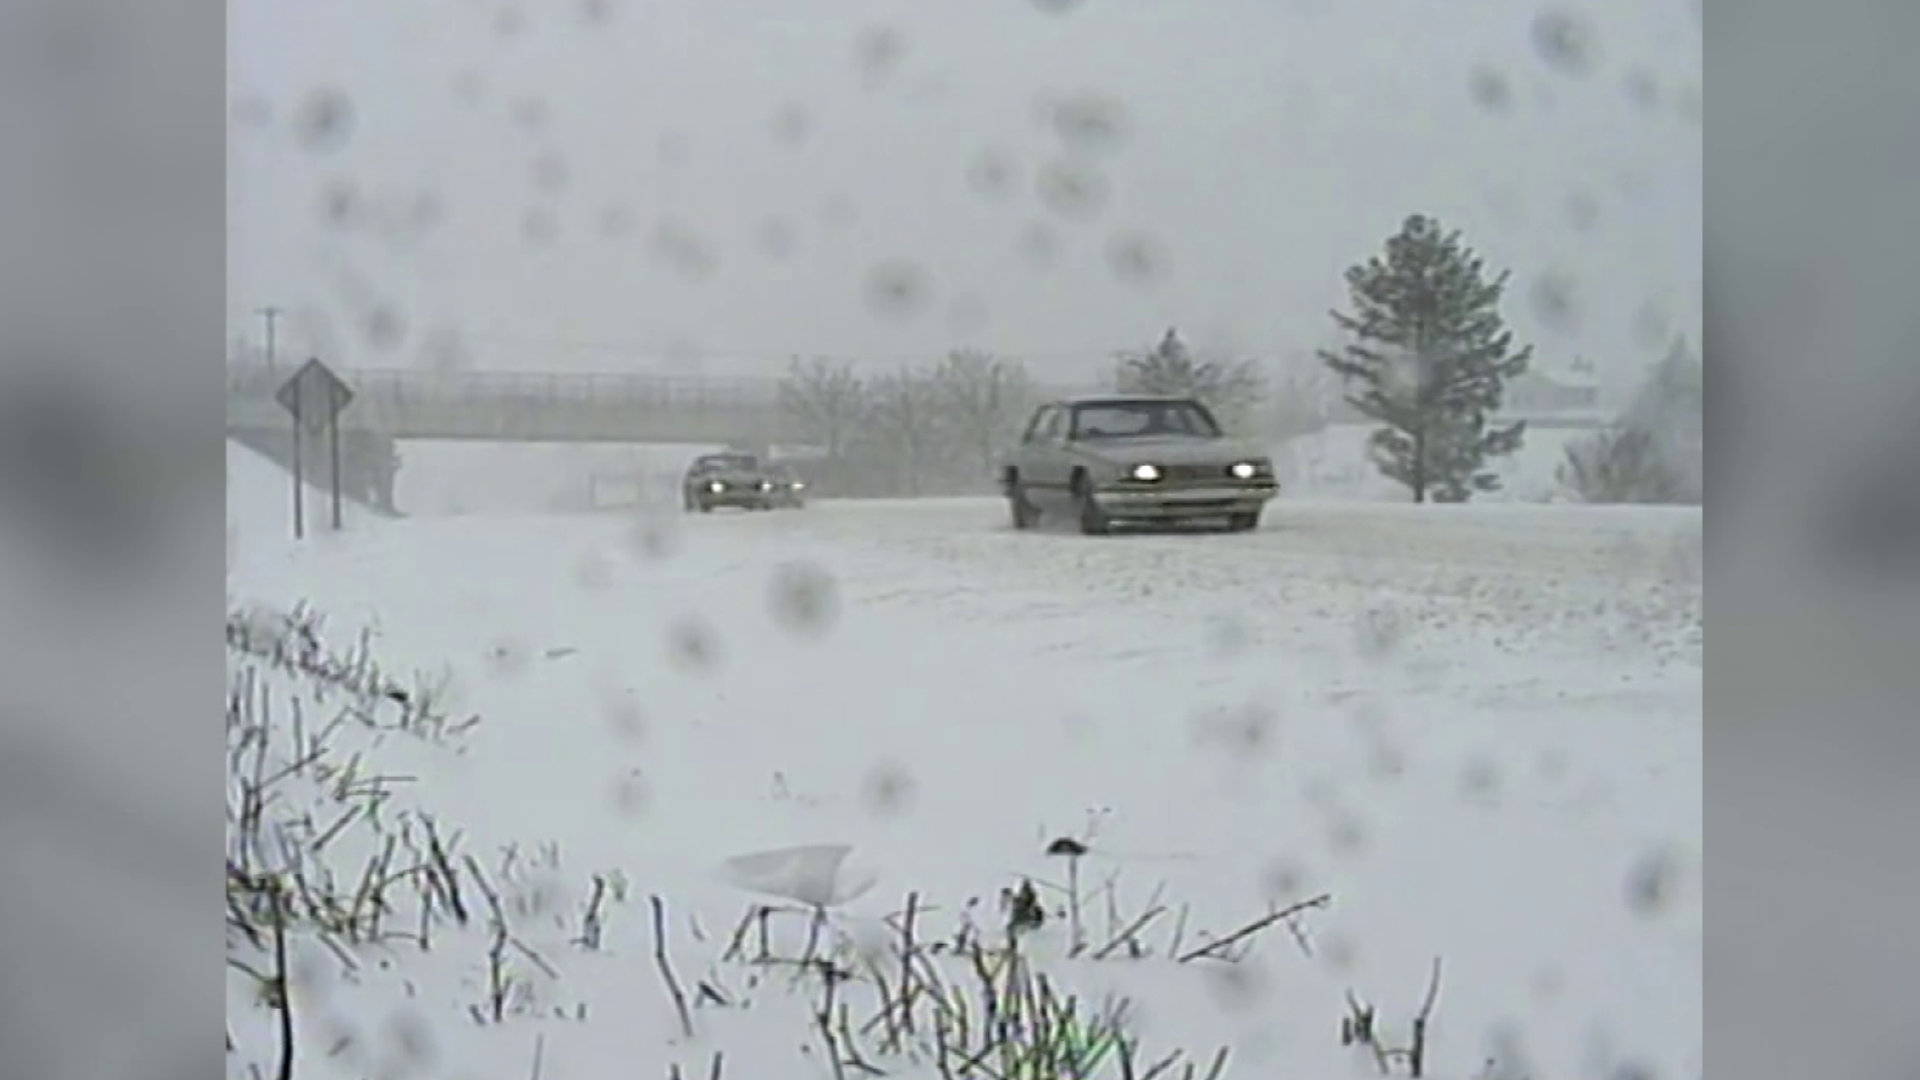 We take a chilly trip back in time to the March snowstorm that slammed our area in 1993.